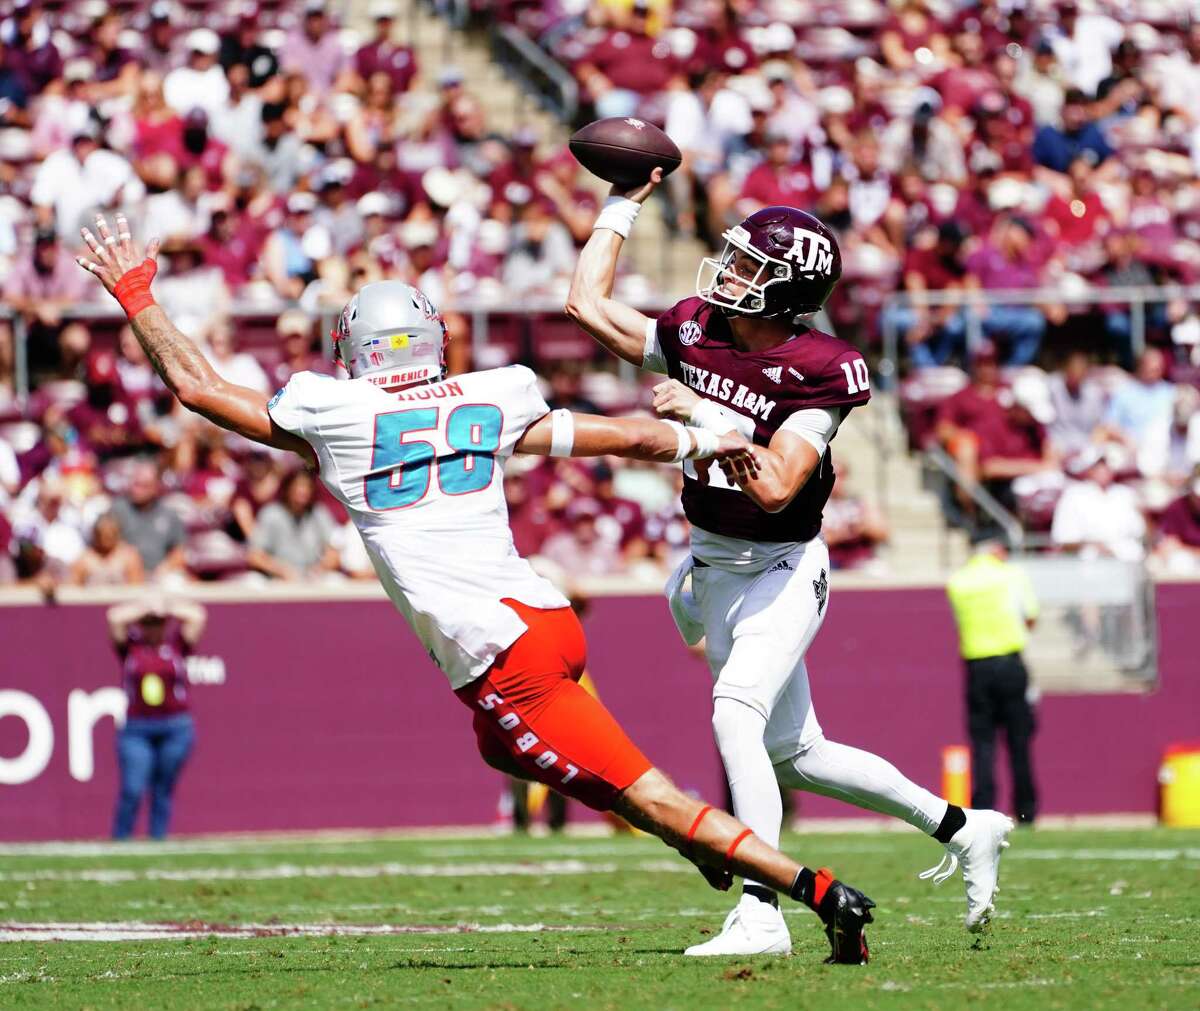 COLLEGE STATION, TX - SEPTEMBER 18: Quarterback Zach Calzada #10 of the Texas A&M Aggies throws during the second quarter of the game against New Mexico Lobos at Kyle Field on September 18, 2021 in College Station, Texas.